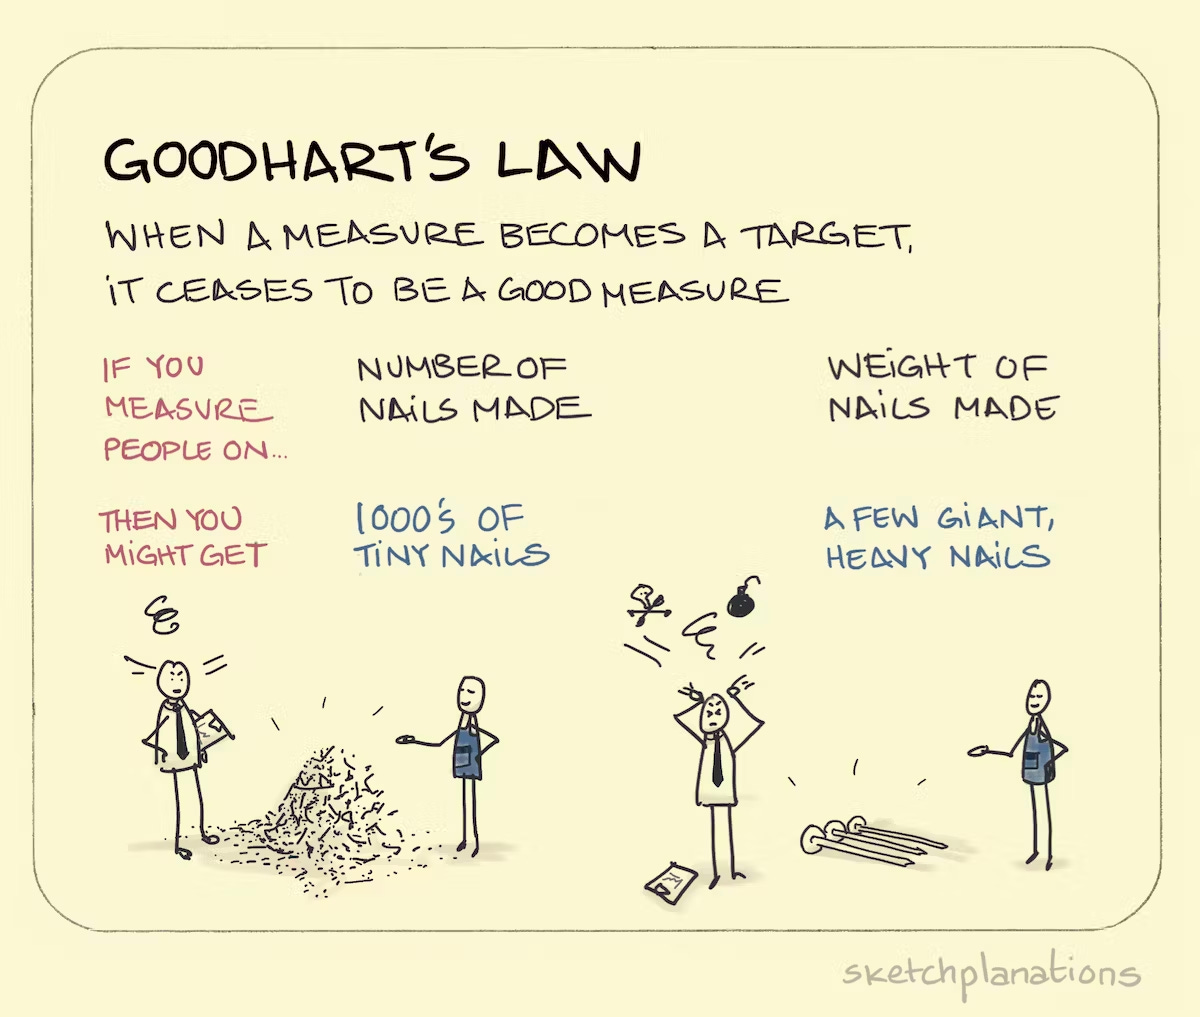 Goodhart’s law. Image source: Sketchplanations